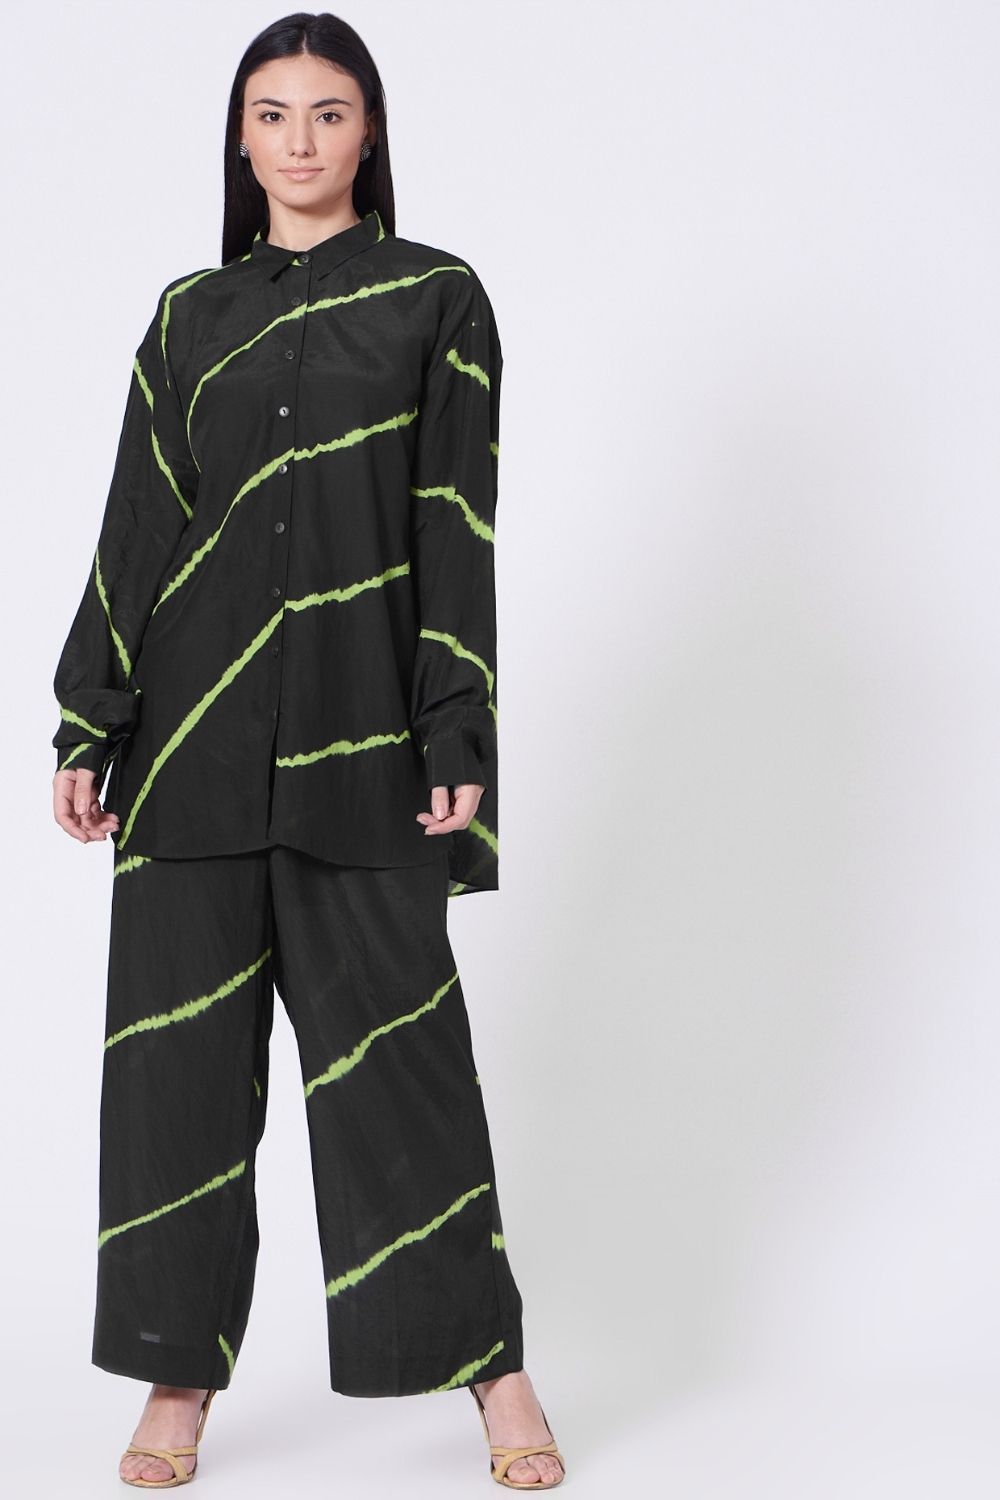 BLACK AND NEON GREEN CO-ORD Fashion The Pot Plant